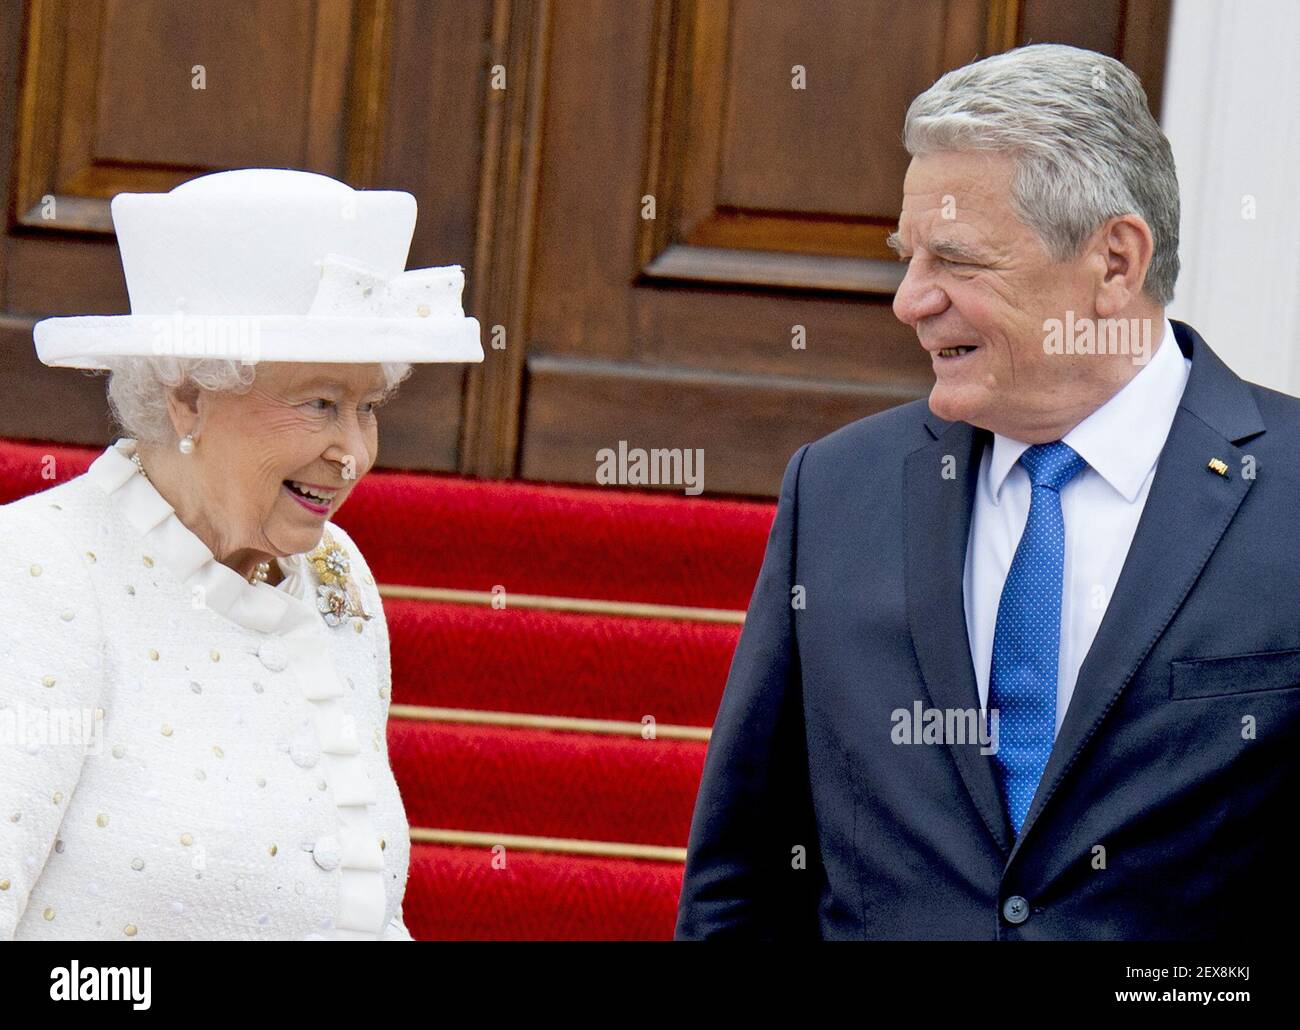 24-6-2015 BERLIN - Britain's Queen Elizabeth II with German President Joachim Gauck as she arrives at Bellevue Palace in Berlin on June 24, 2015. (Photo by Robin Utrecht) *** Please Use Credit from Credit Field *** Stock Photo